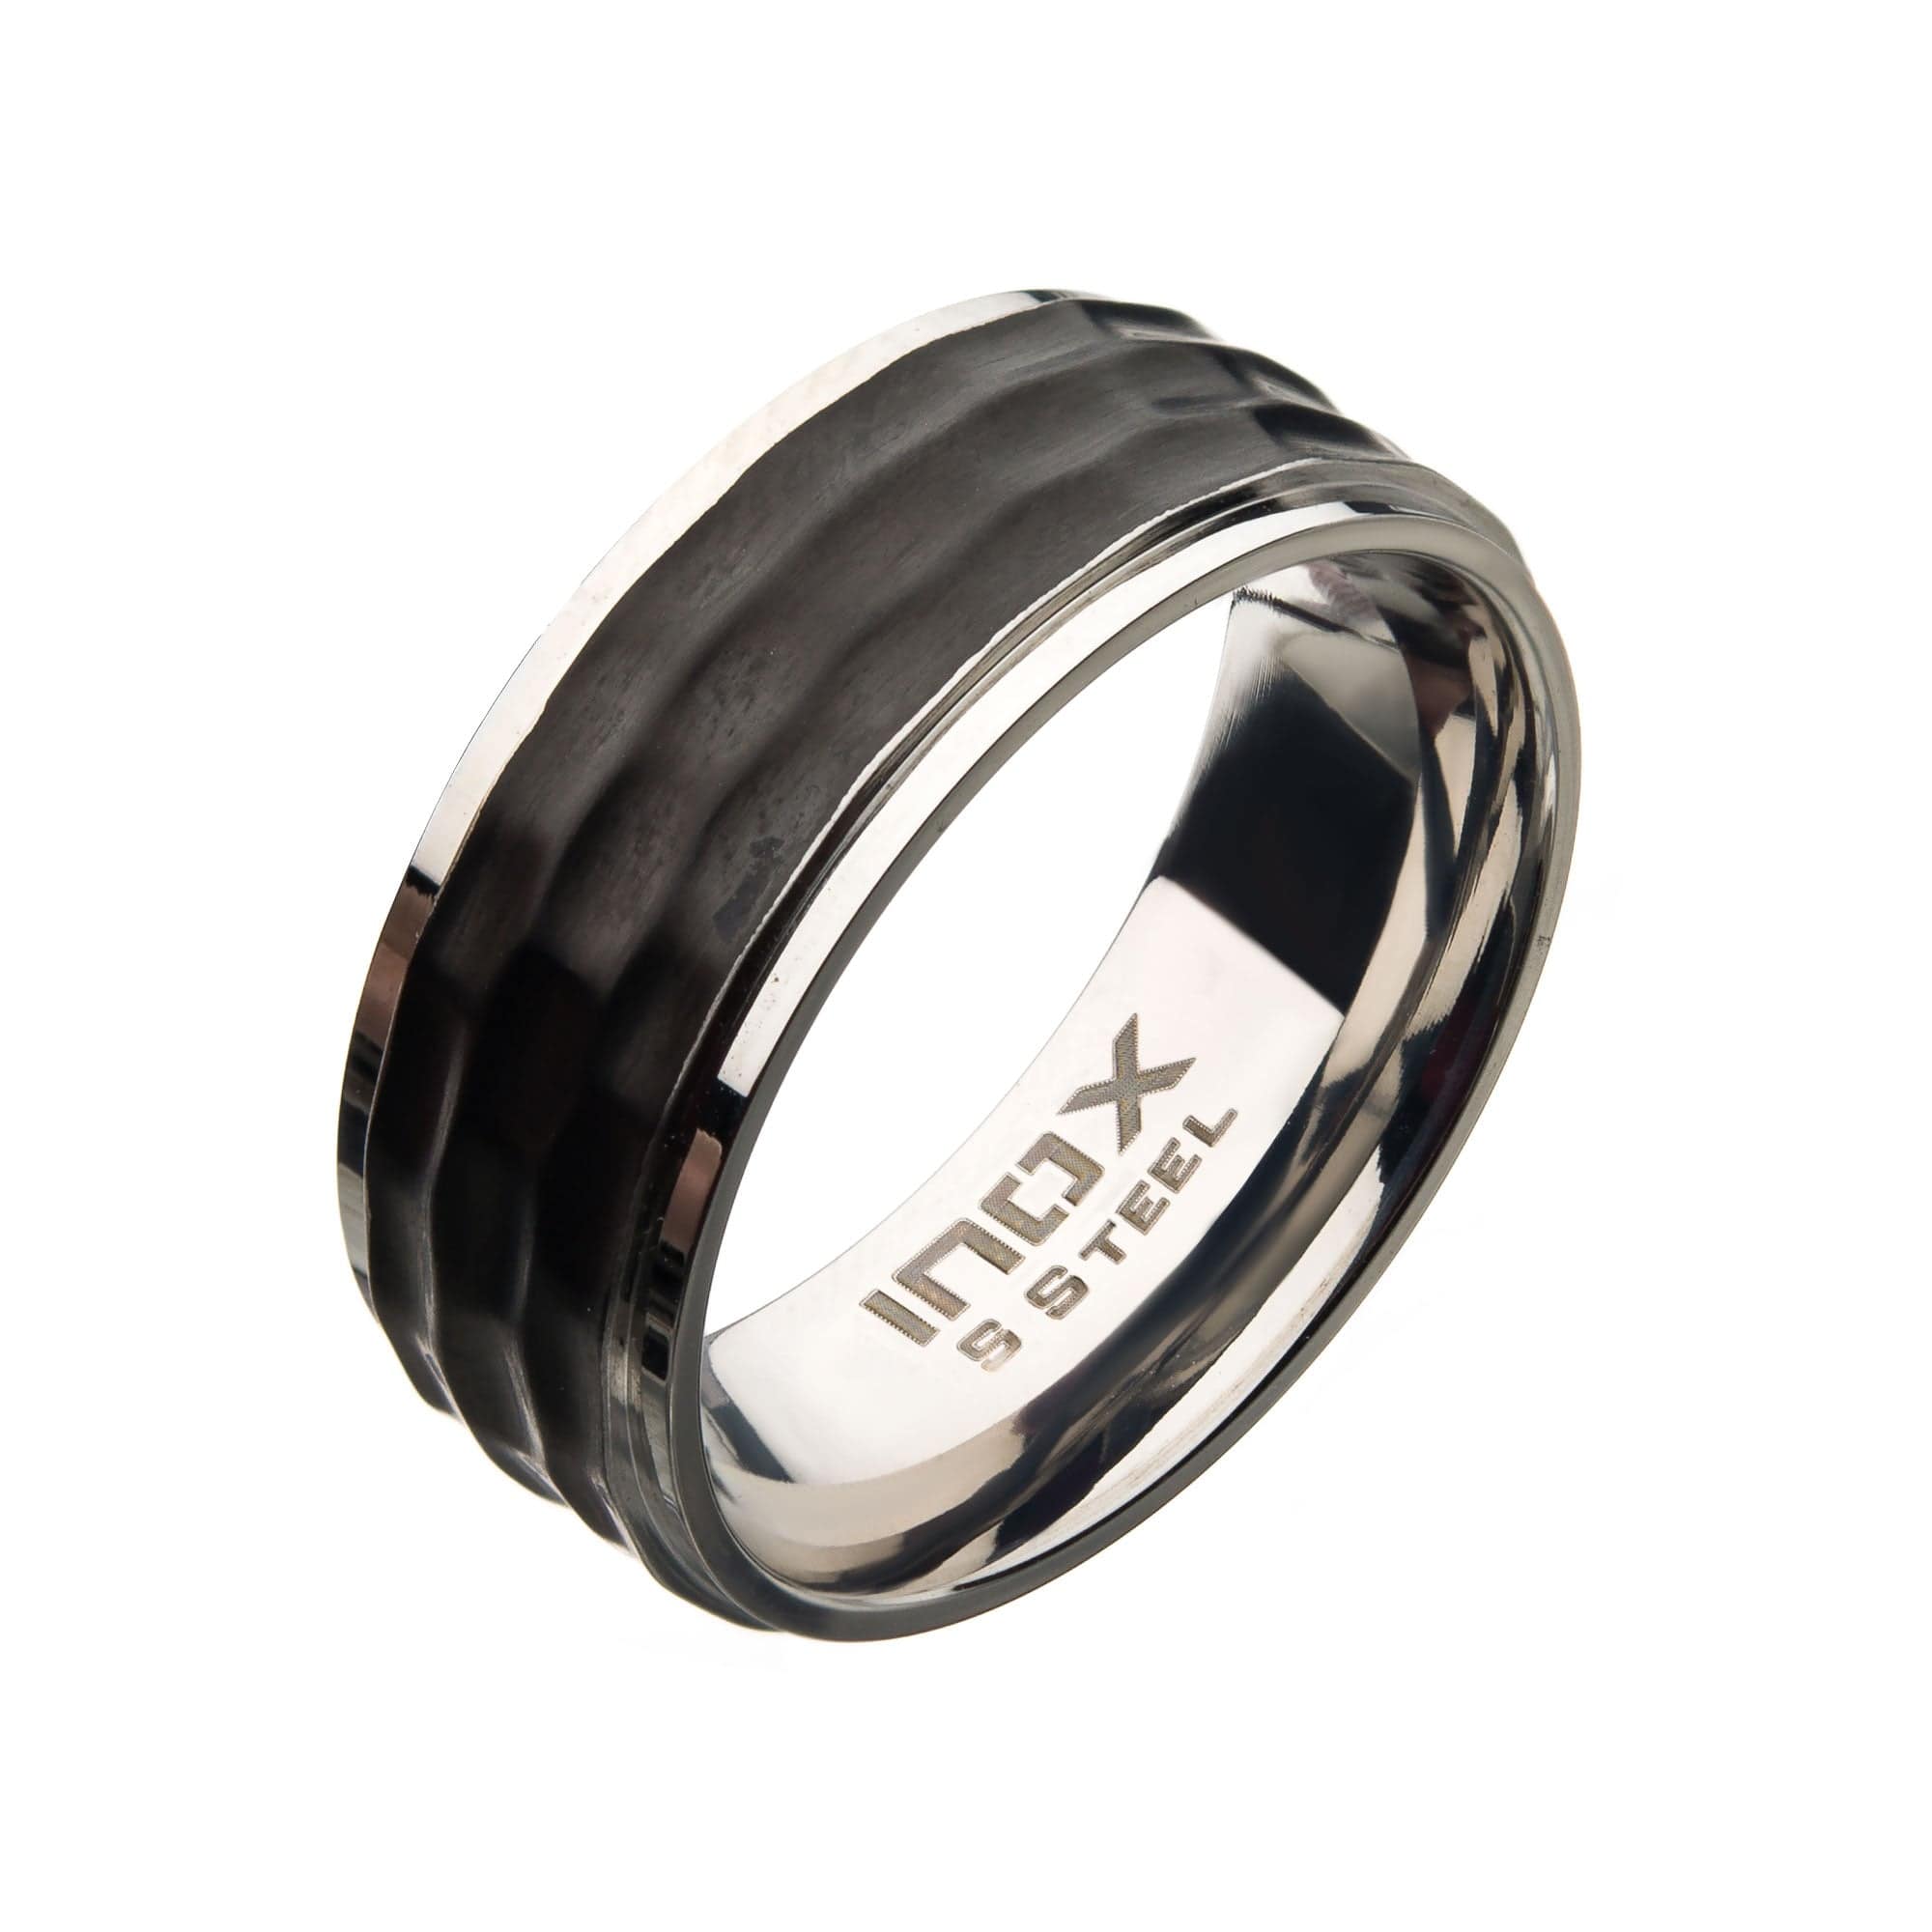 INOX JEWELRY Rings Black and Silver Tone Stainless Steel Matte Finish Hammered Design Inlaid Band Ring